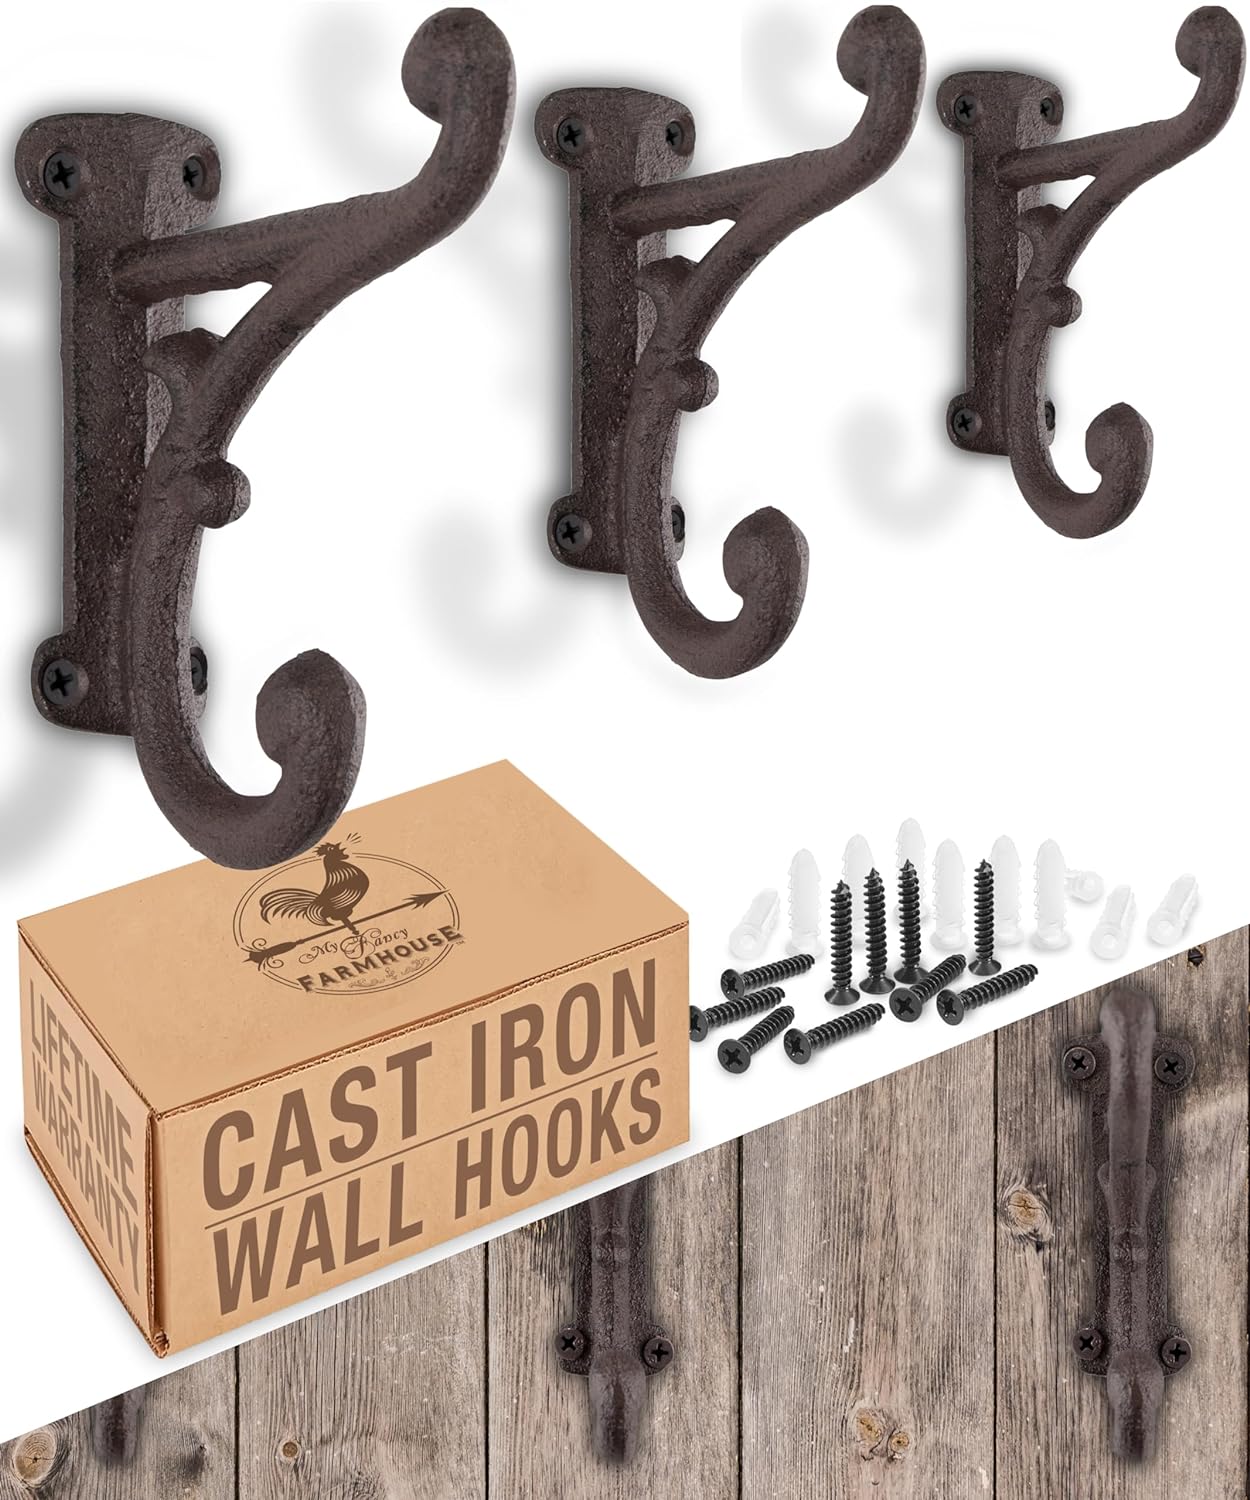 Rustic Cast Iron Coat Hooks (3 Pack) Antique White and Dark Brown, Wall Mounted, Farmhouse Decorative, Heavy Duty Wall Hooks for Hanging Coats, Hats, Towels (Mounting Hardware Included)